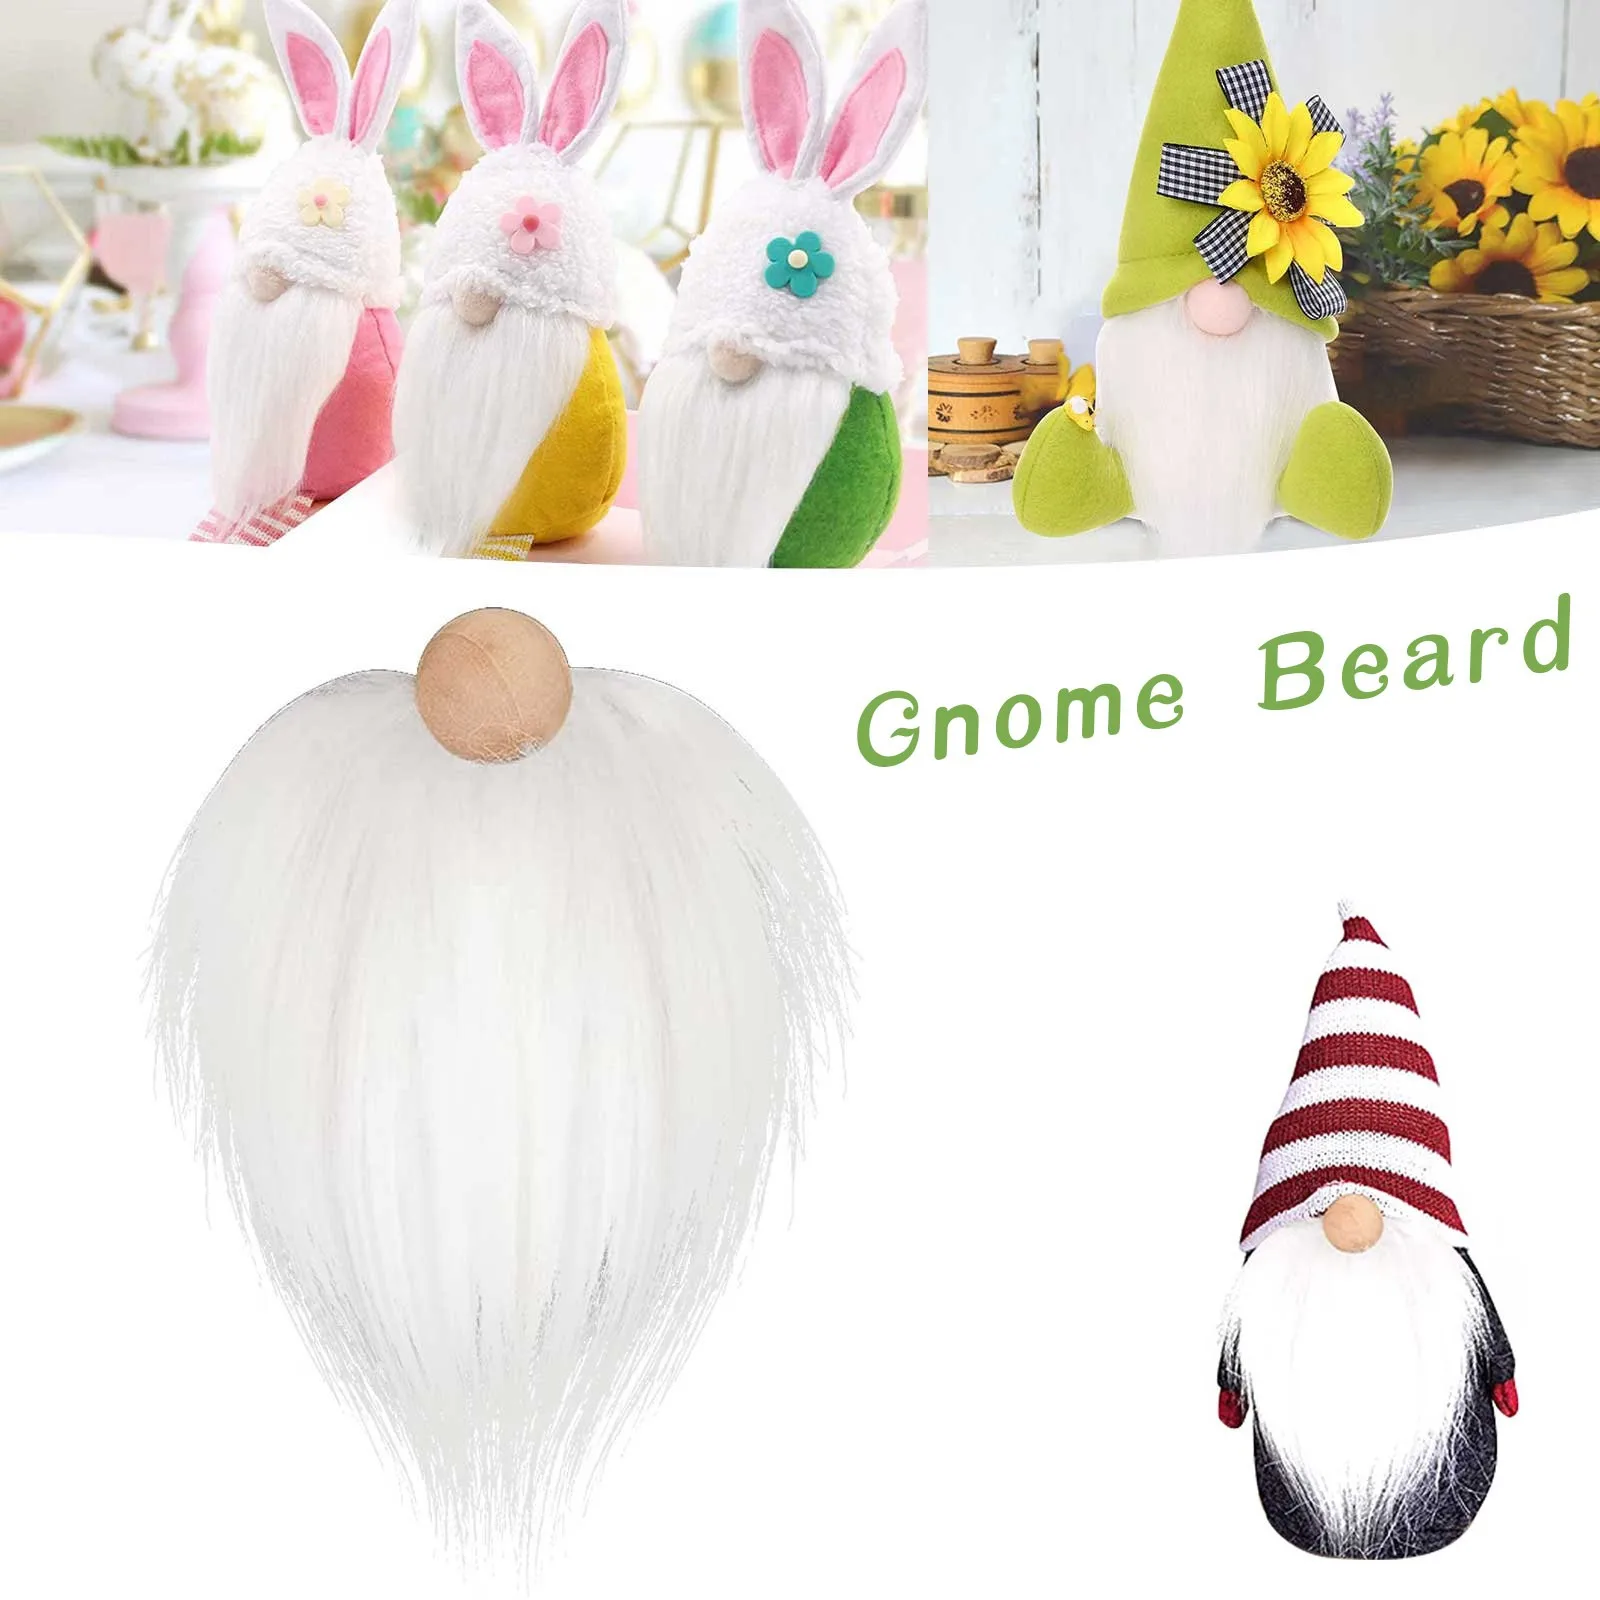 3Pcs Faux Fur Gnome Beard With Ball For Festival Decor DIY Handmade Craft Gnomes Plush Hair Cosplay Costume Making Accessory